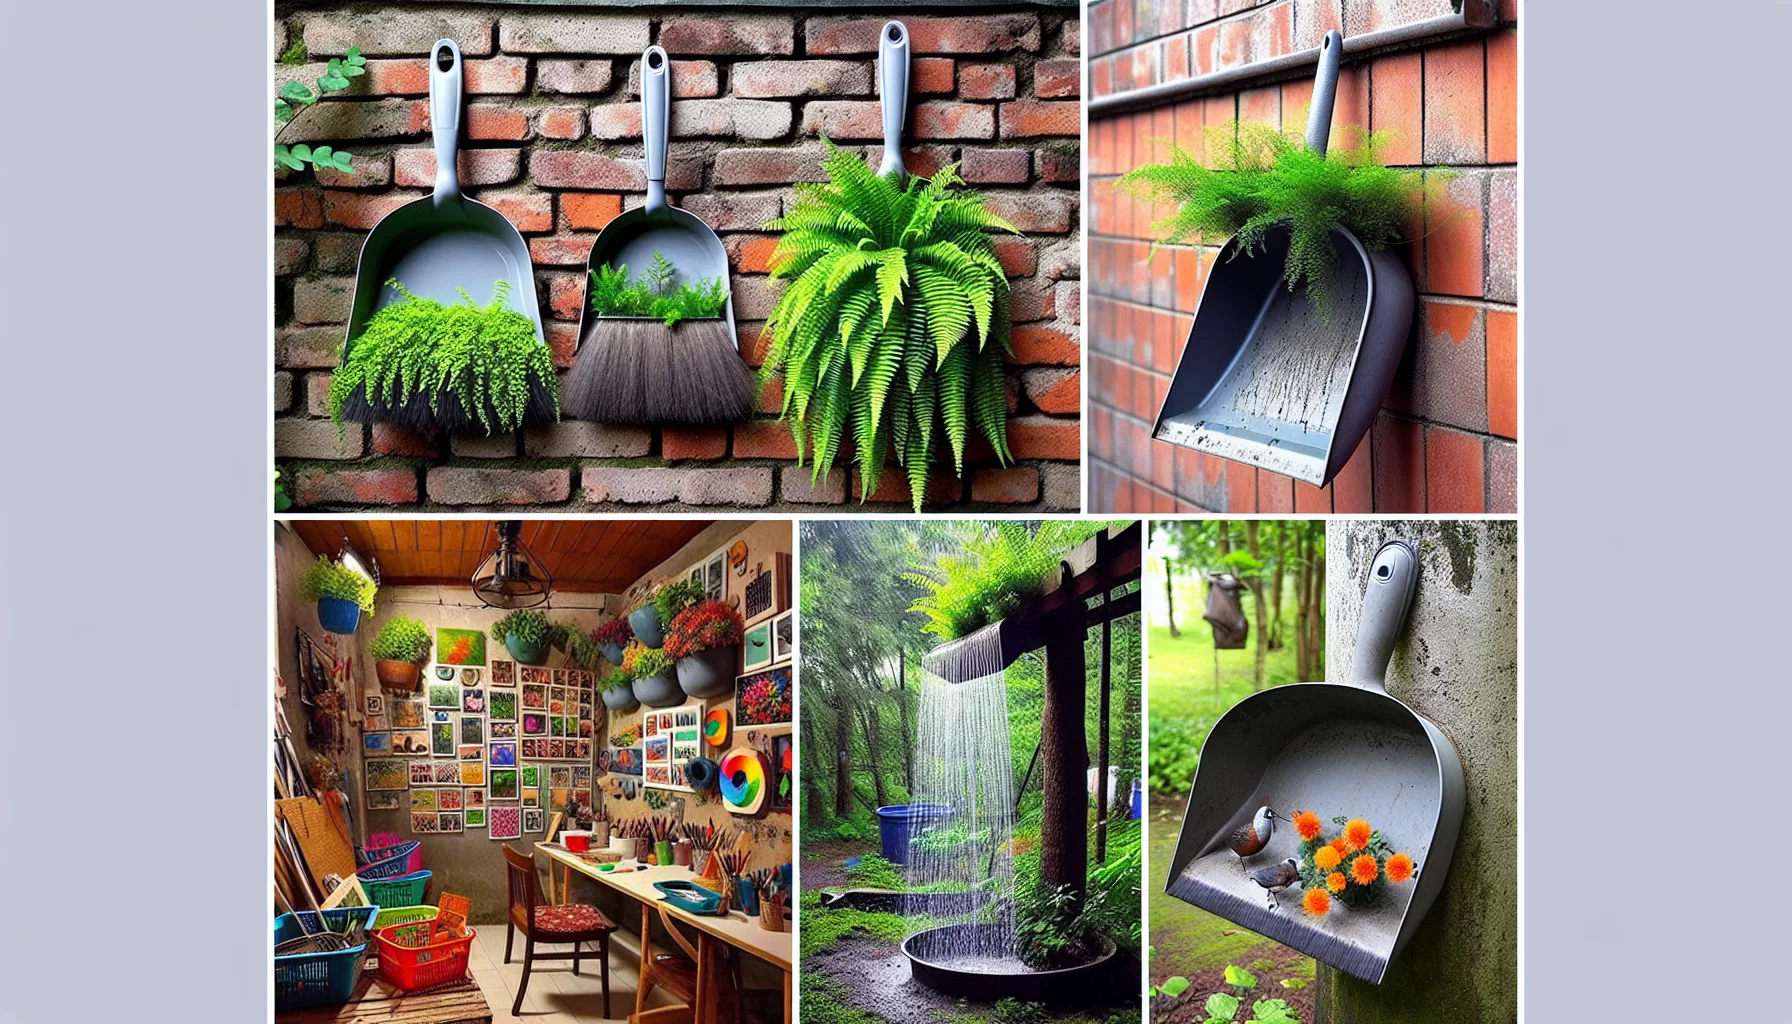 Discover how versatile dust pans can be: ingenious uses for home and garden